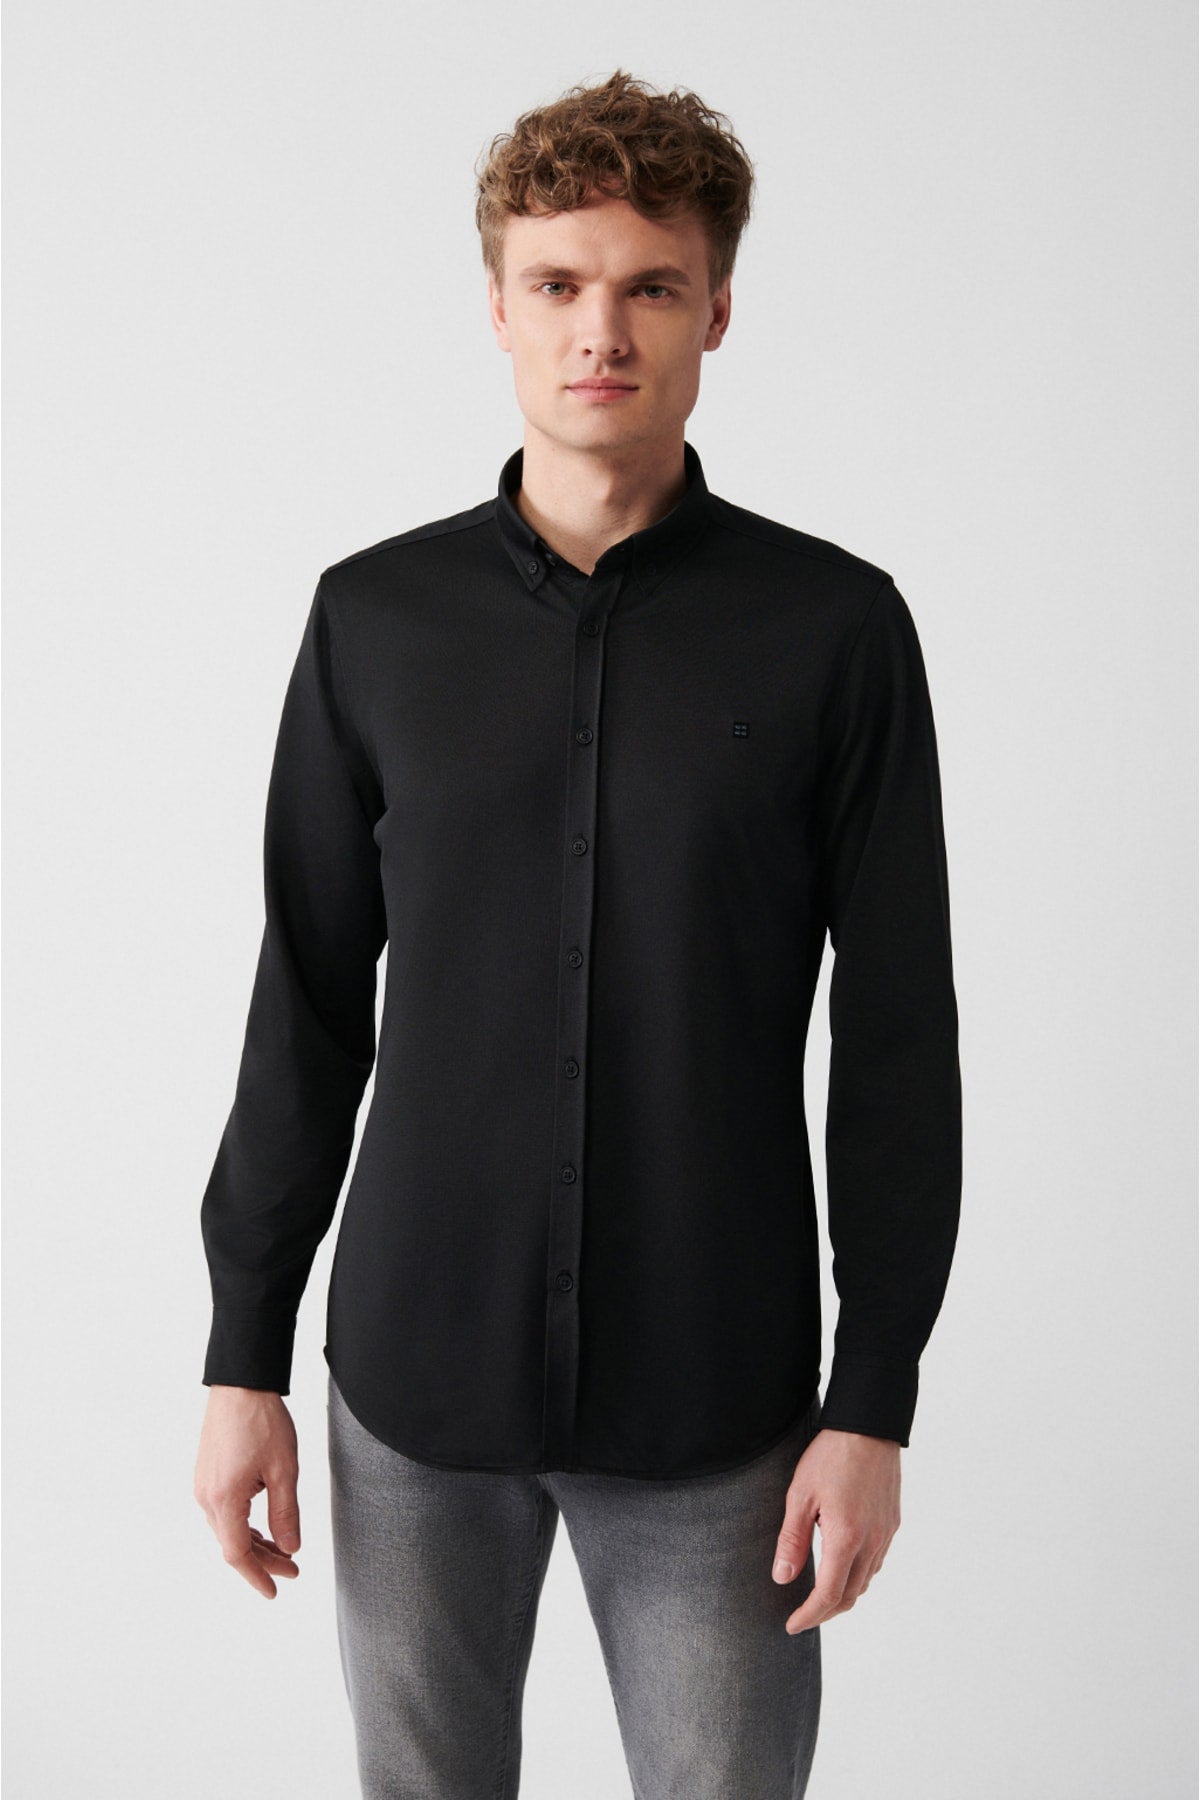 Men's Black Easy ironable textured knitting slim fit shirt A31y2067